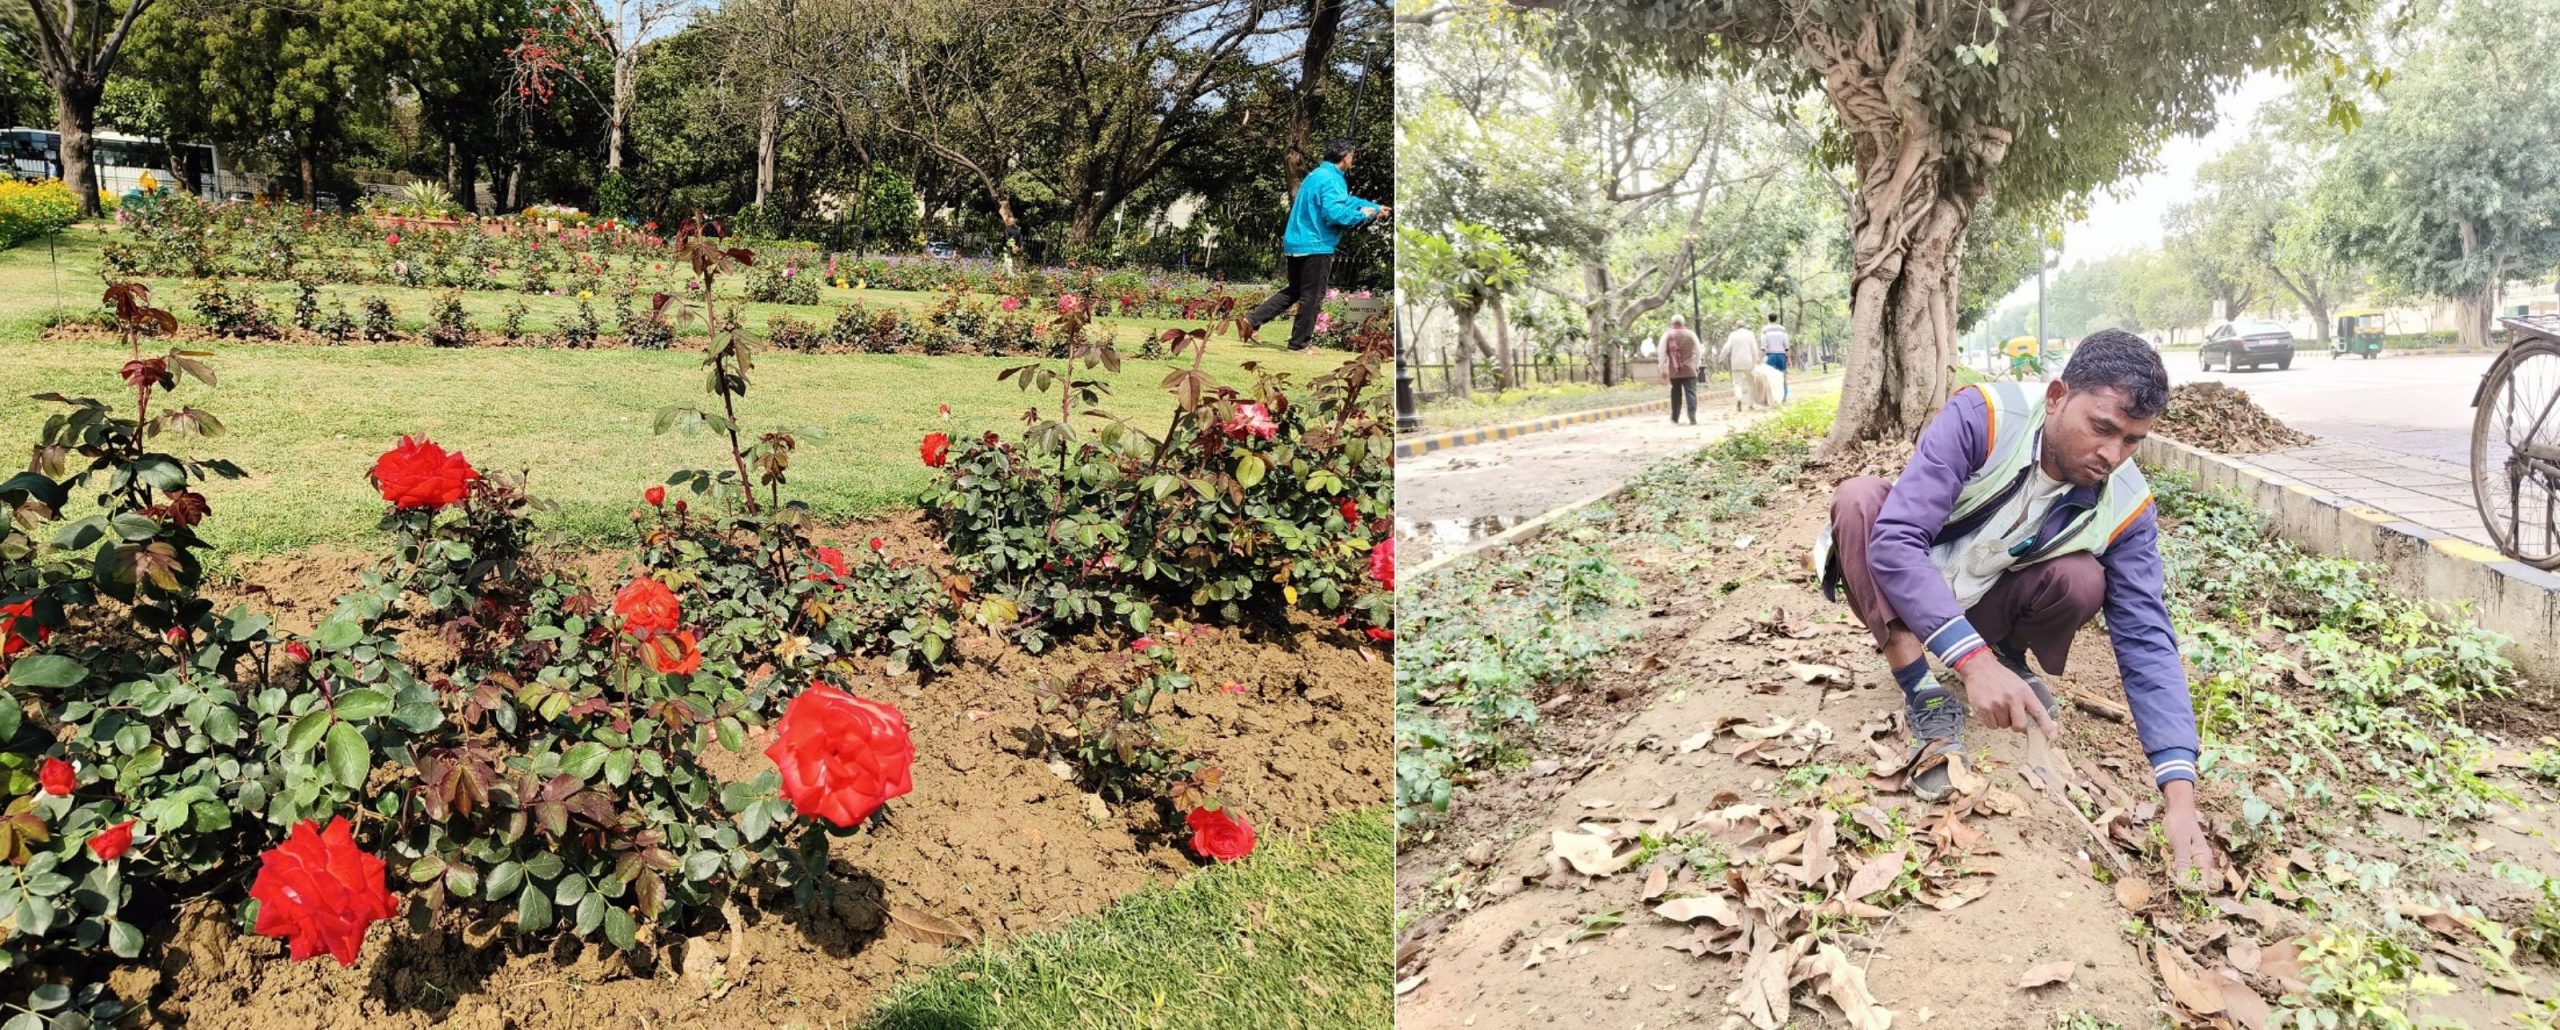 The lives of city’s gardeners not a bed of roses